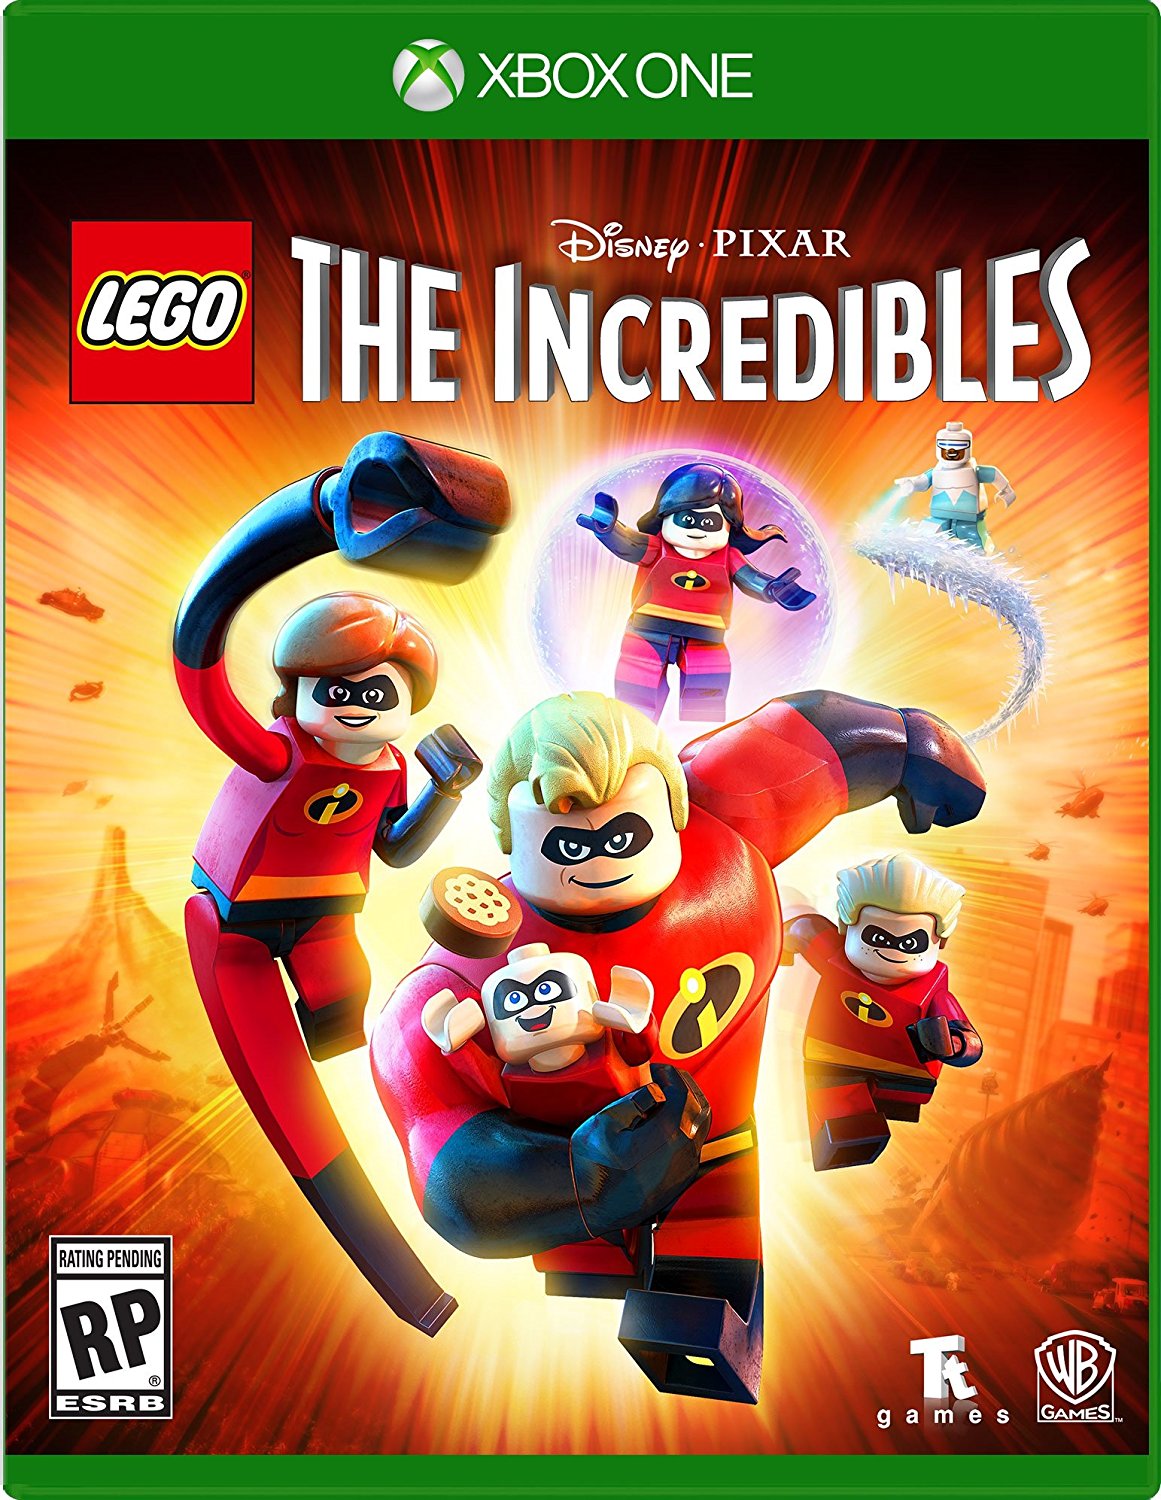 LEGO The Incredibles Xbox One cover (Warner Bros. Interactive Entertainment)